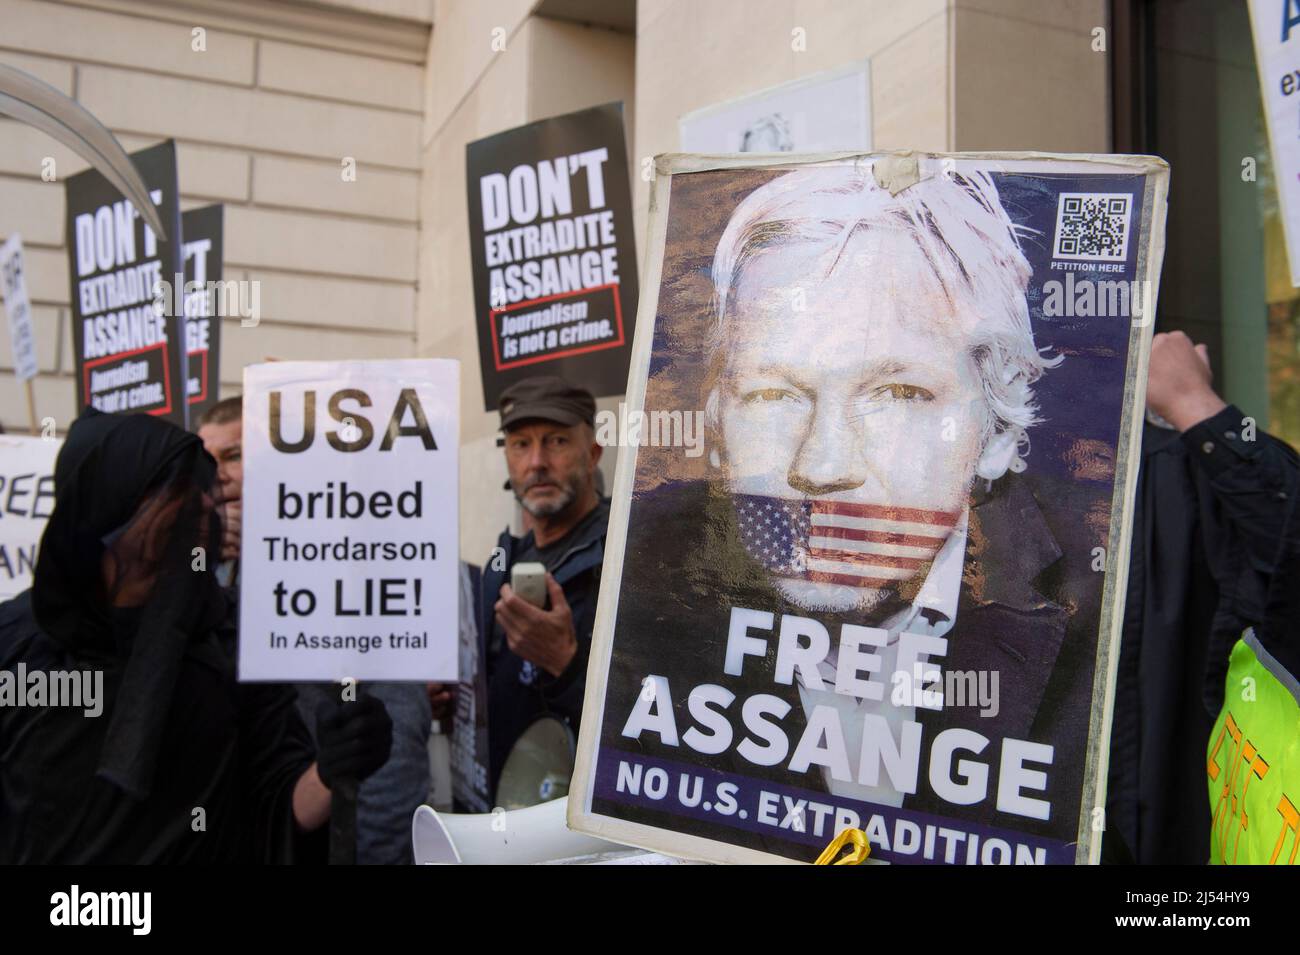 London, UK, London, UK. 20th Apr, 2022. Supporters of WikiLeaks Co-founder Julian Assange outside Westminister Magistrates Court following formal approval for the extradition of Julian Assange to the US on espionage charges, a decision to be made by the UK home secretary, Priti Patel. Credit: claire doherty/Alamy Live News Stock Photo